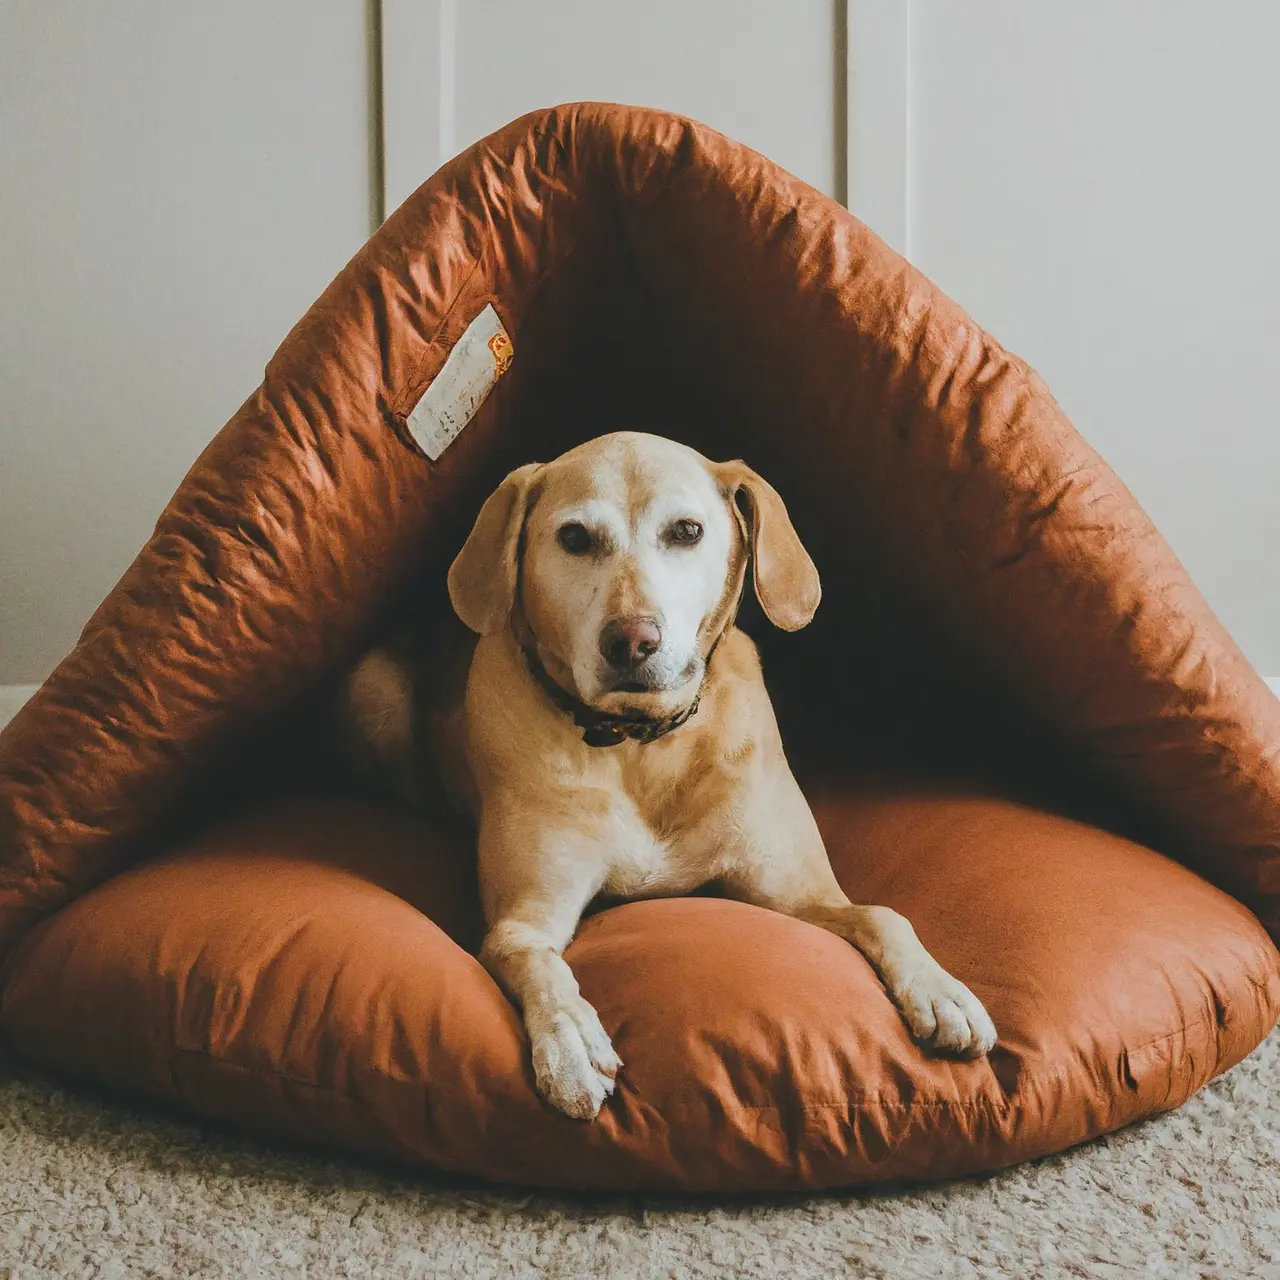 A dog lounging on a plush, premium dog bed. 35mm stock photo